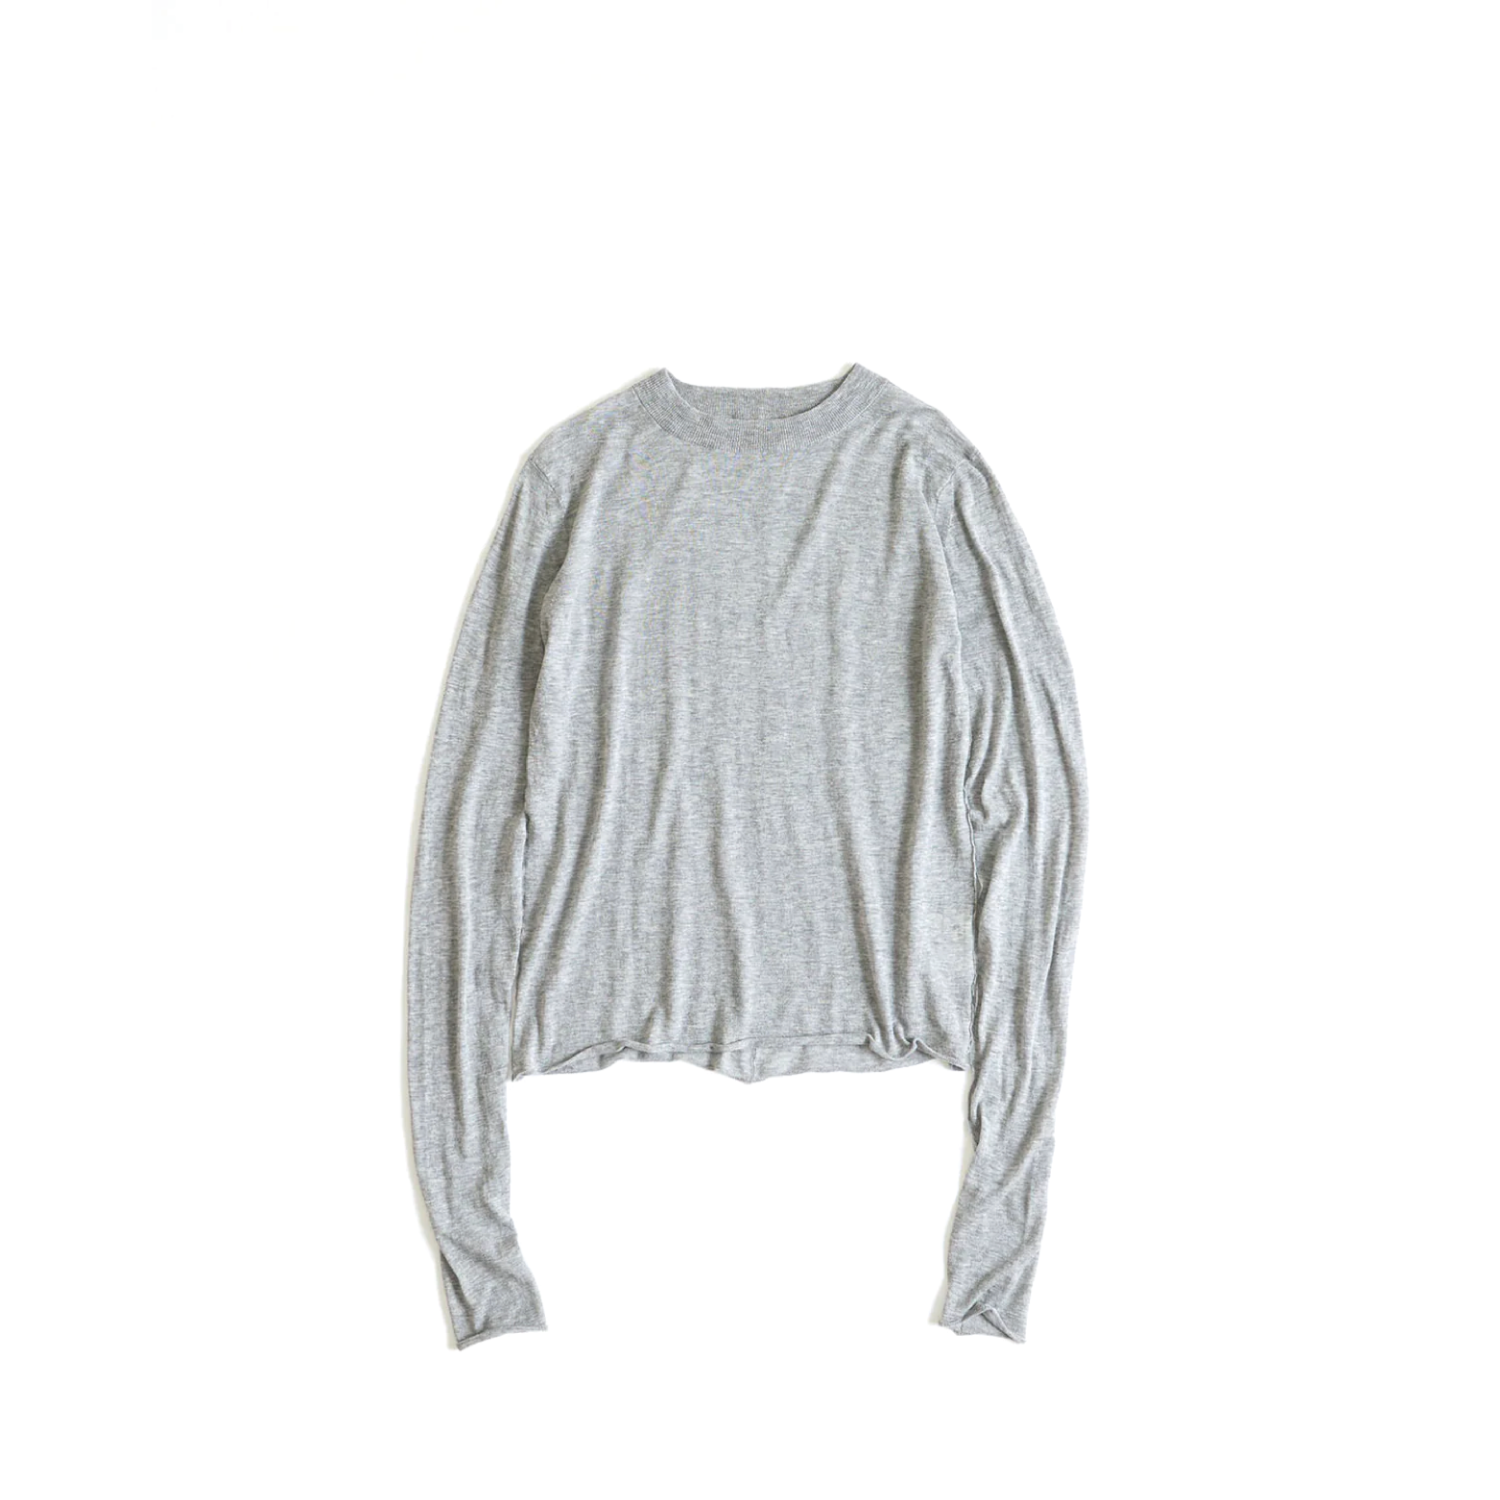 ﻿Cotton Cashmere Sheer Knit - Grey